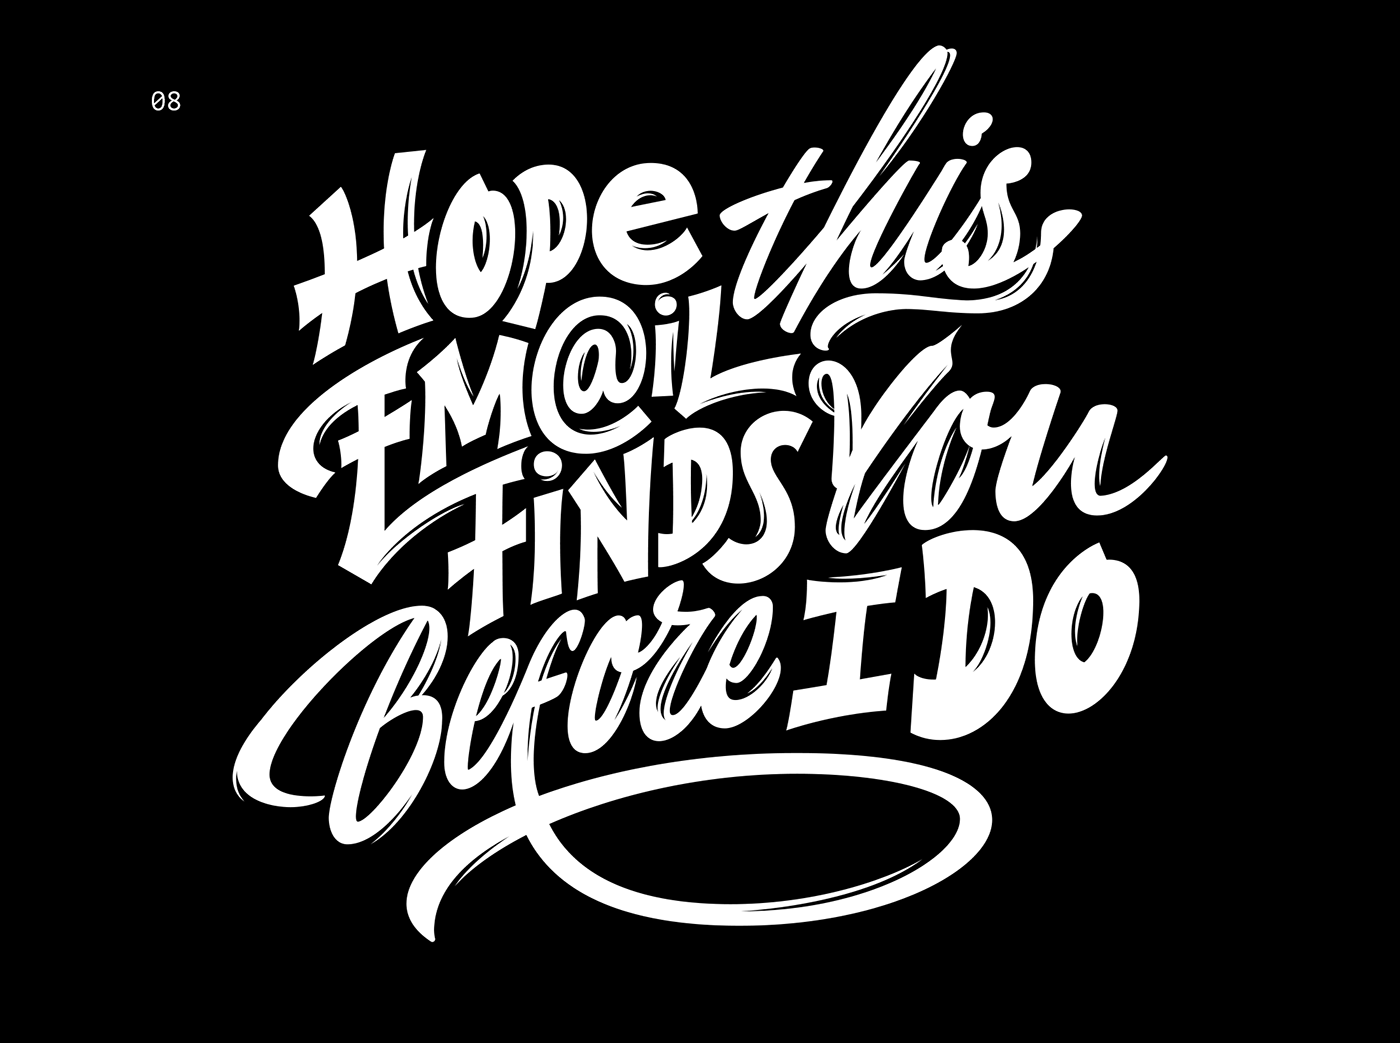 Lettering and calligraphy print for t-shirt "Hope this email finds you before I Do" by Nikita Bauer